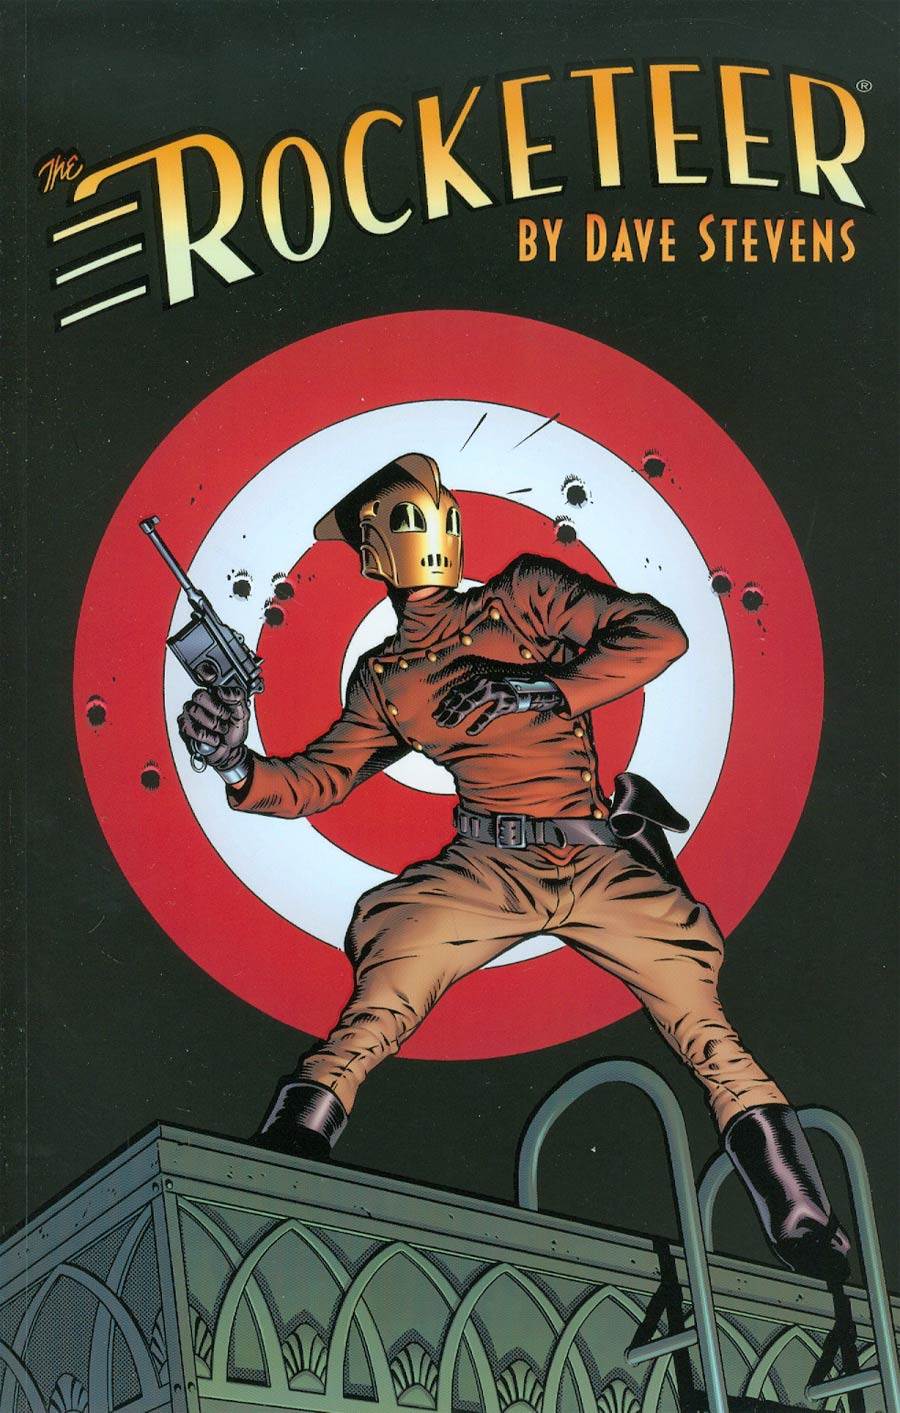 Rocketeer The Complete Adventures TP